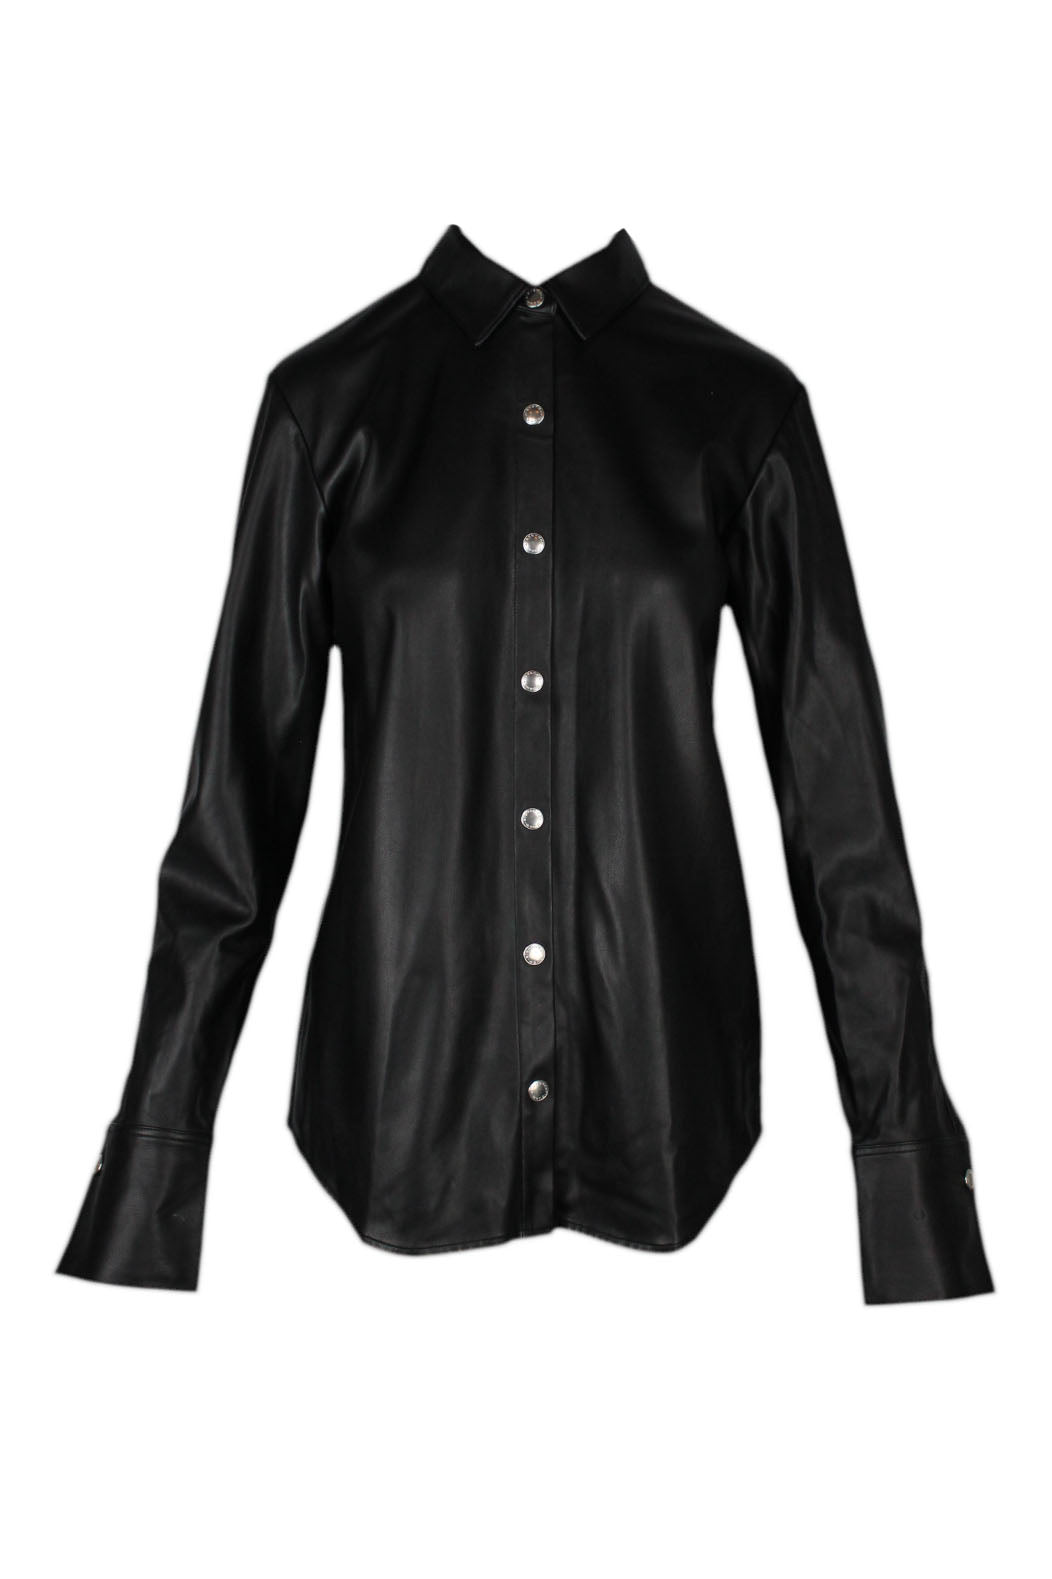 description: alexanderwang.t black long sleeve faux-leather shirt. features collar, pressure fastener closure at center front, cuffed long sleeves, and fitted st